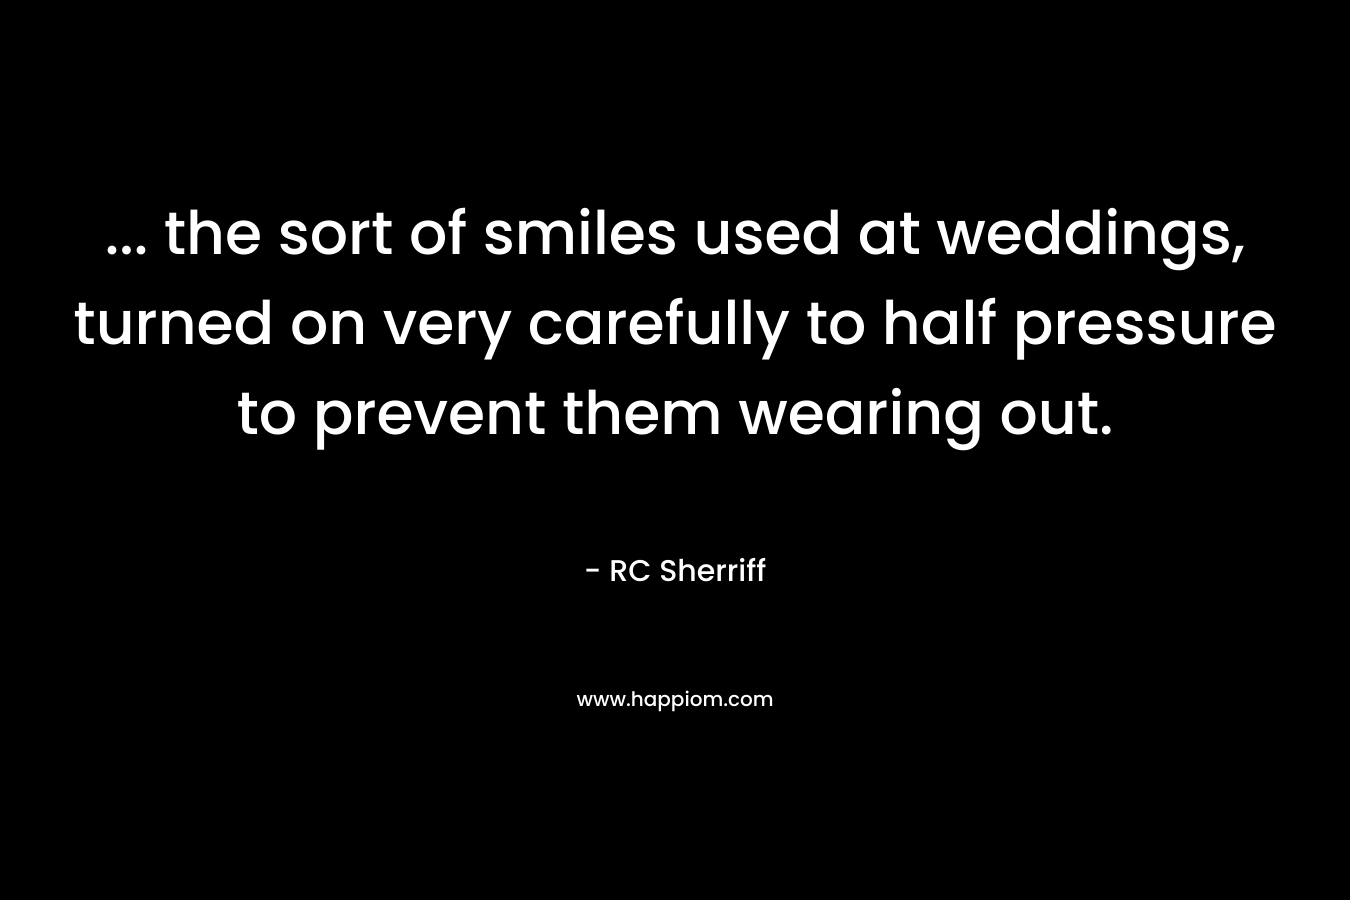 … the sort of smiles used at weddings, turned on very carefully to half pressure to prevent them wearing out. – RC Sherriff